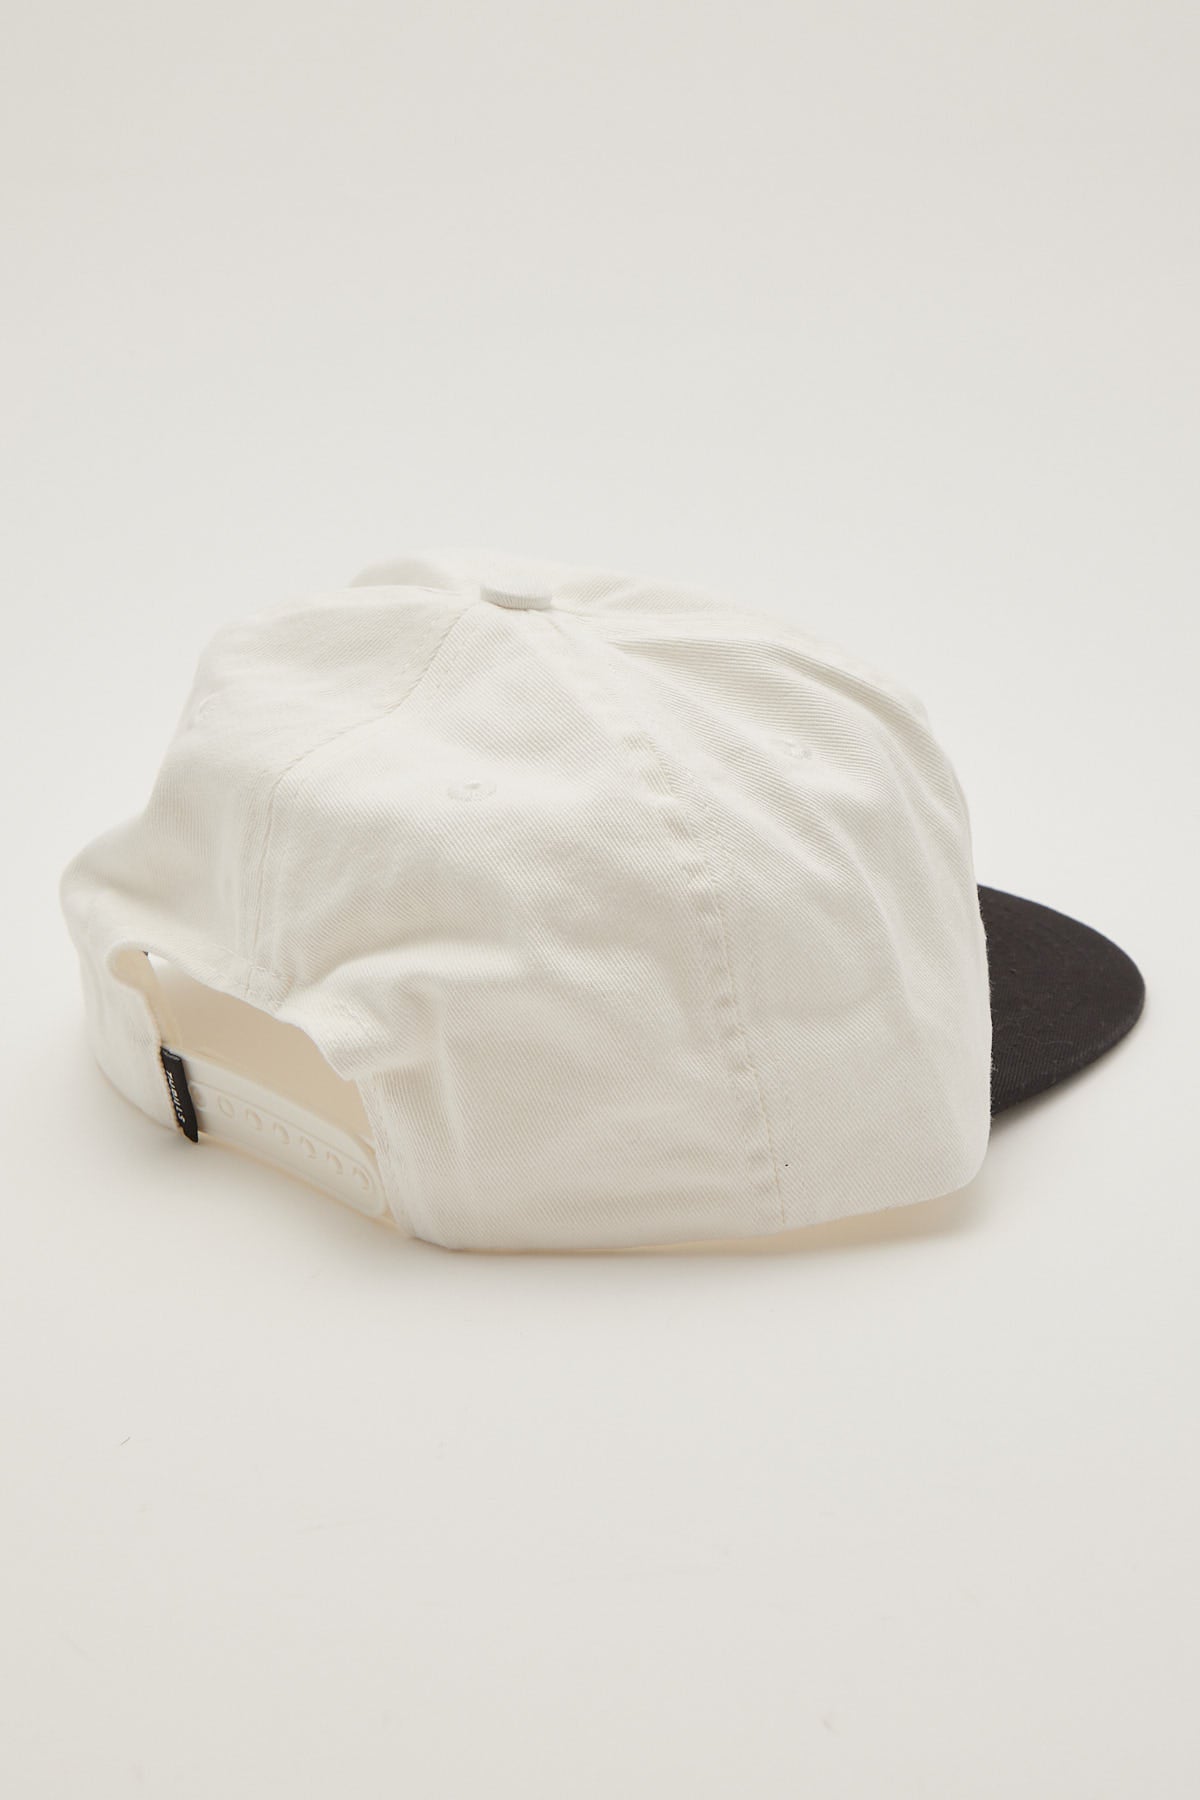 Thrills United For All 5 Panel Cap Dirty White